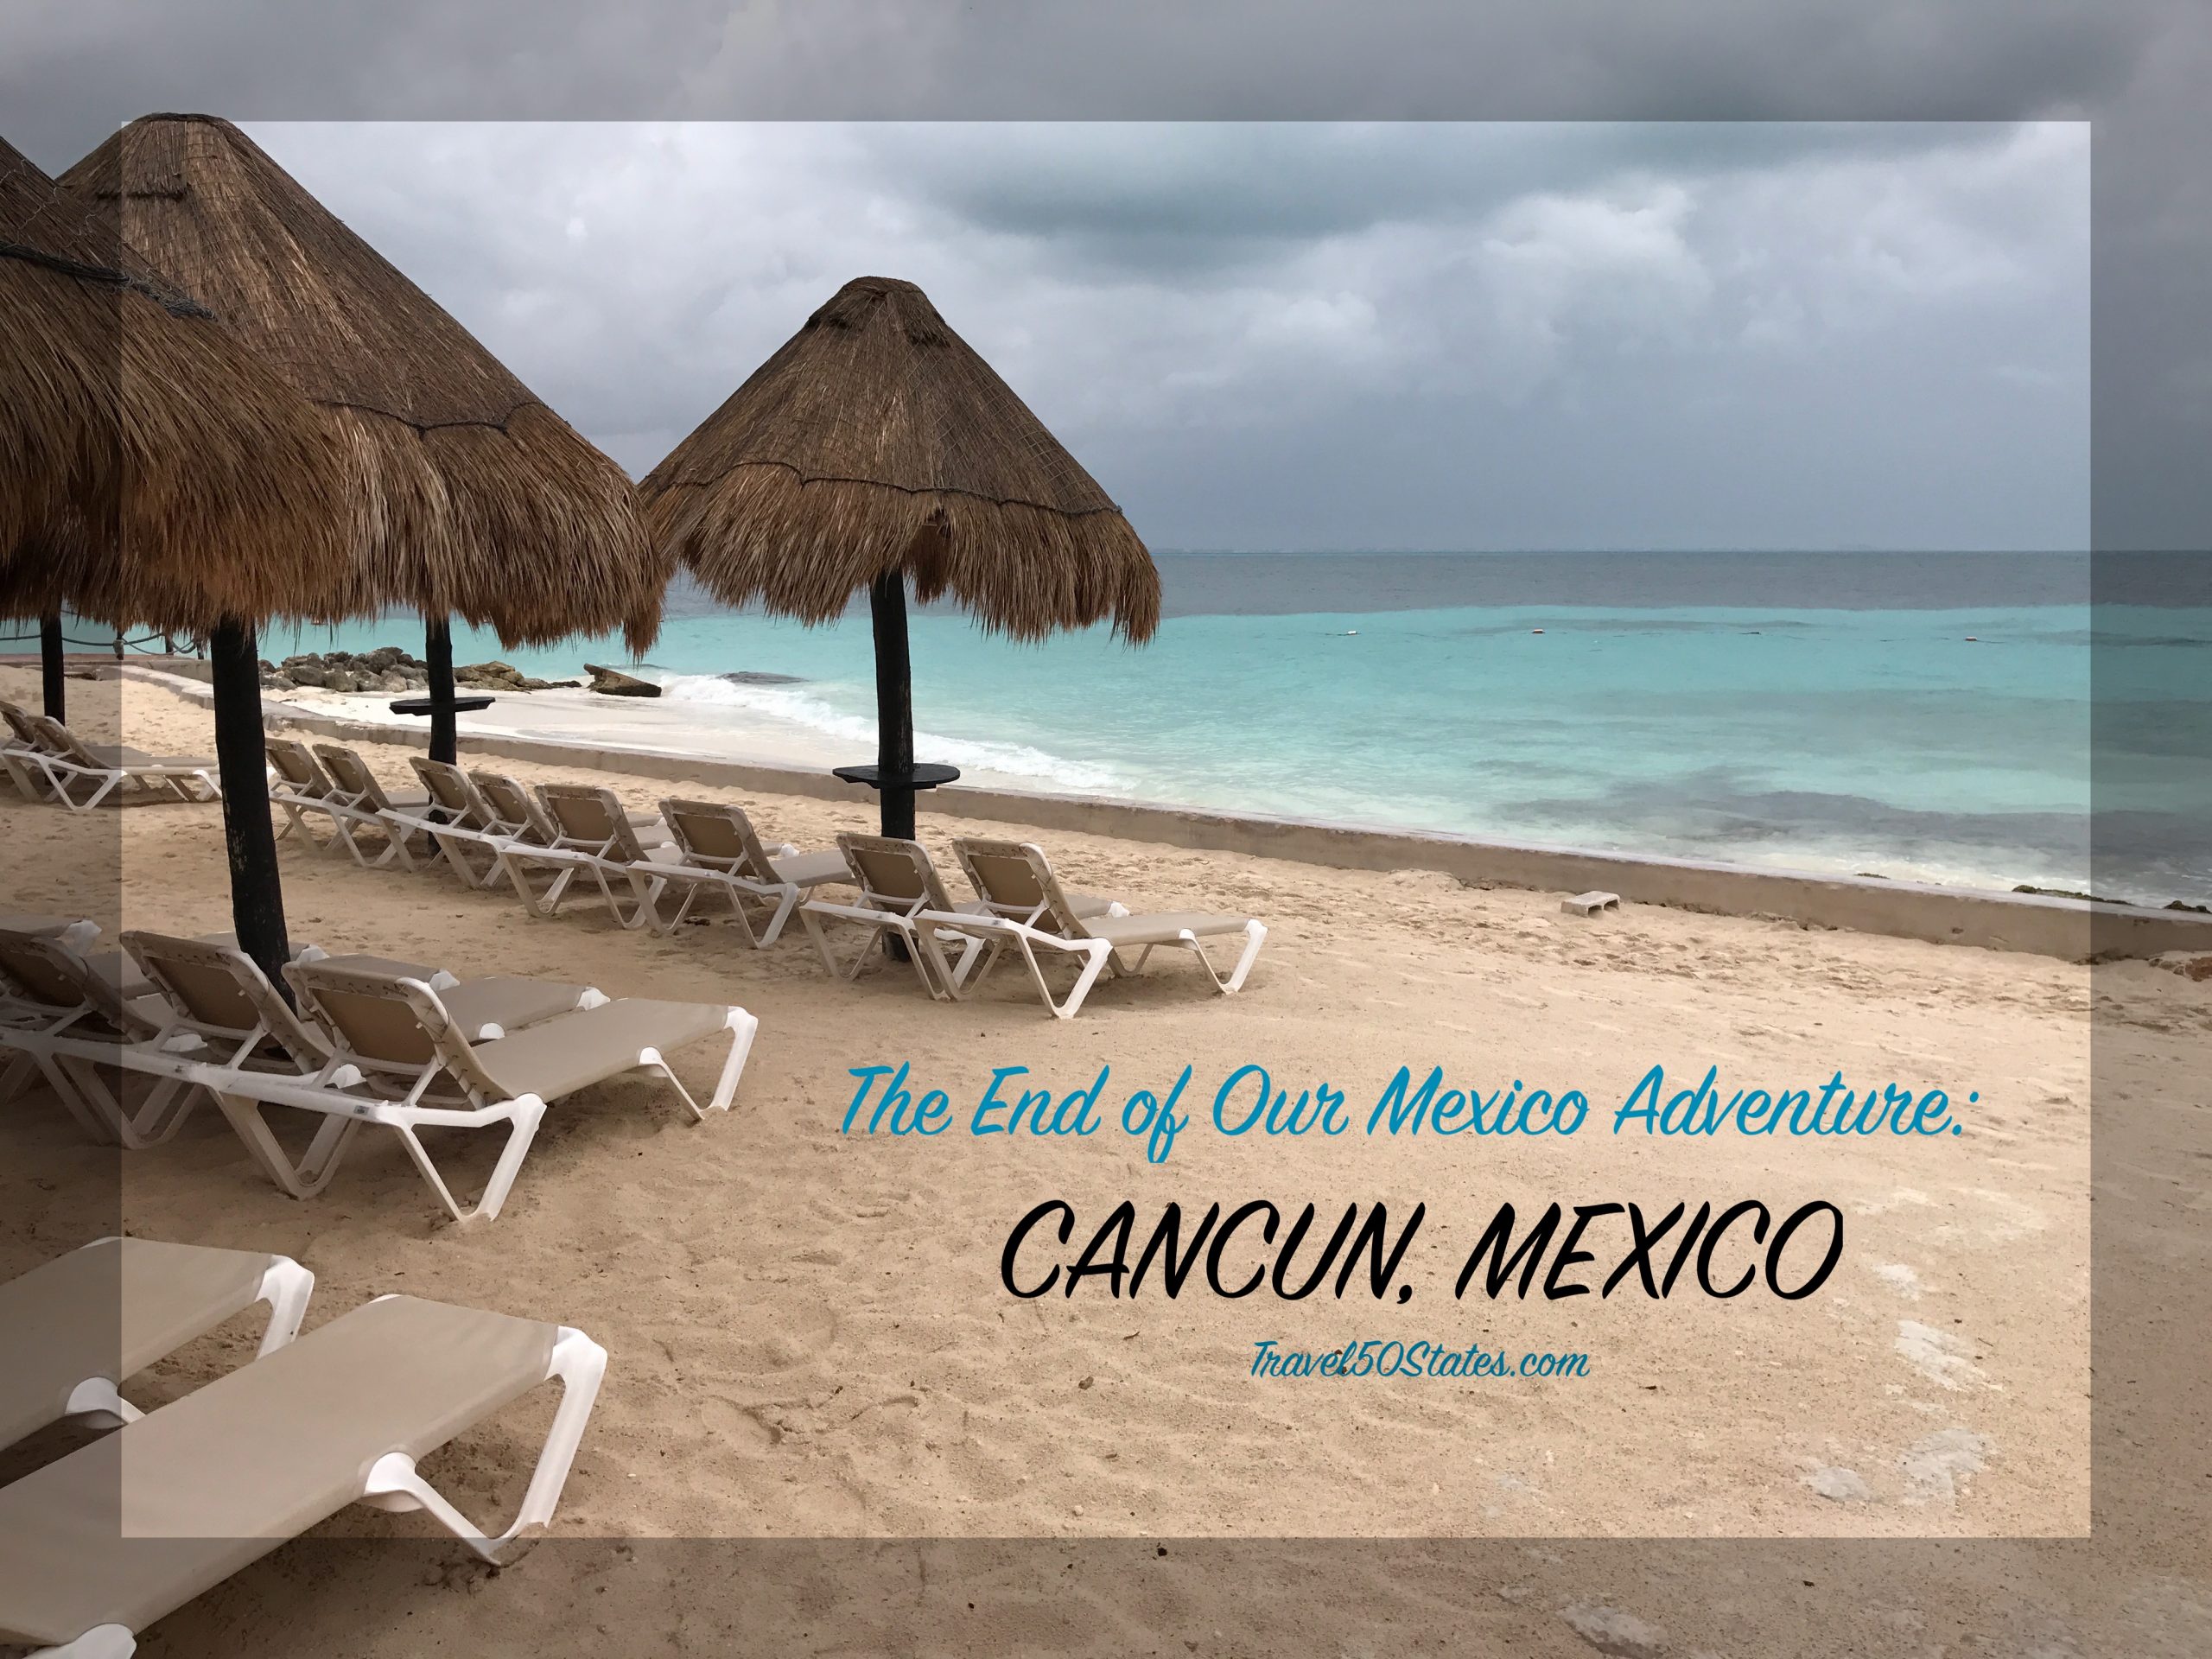 The End of Our Mexico Adventure: Cancun